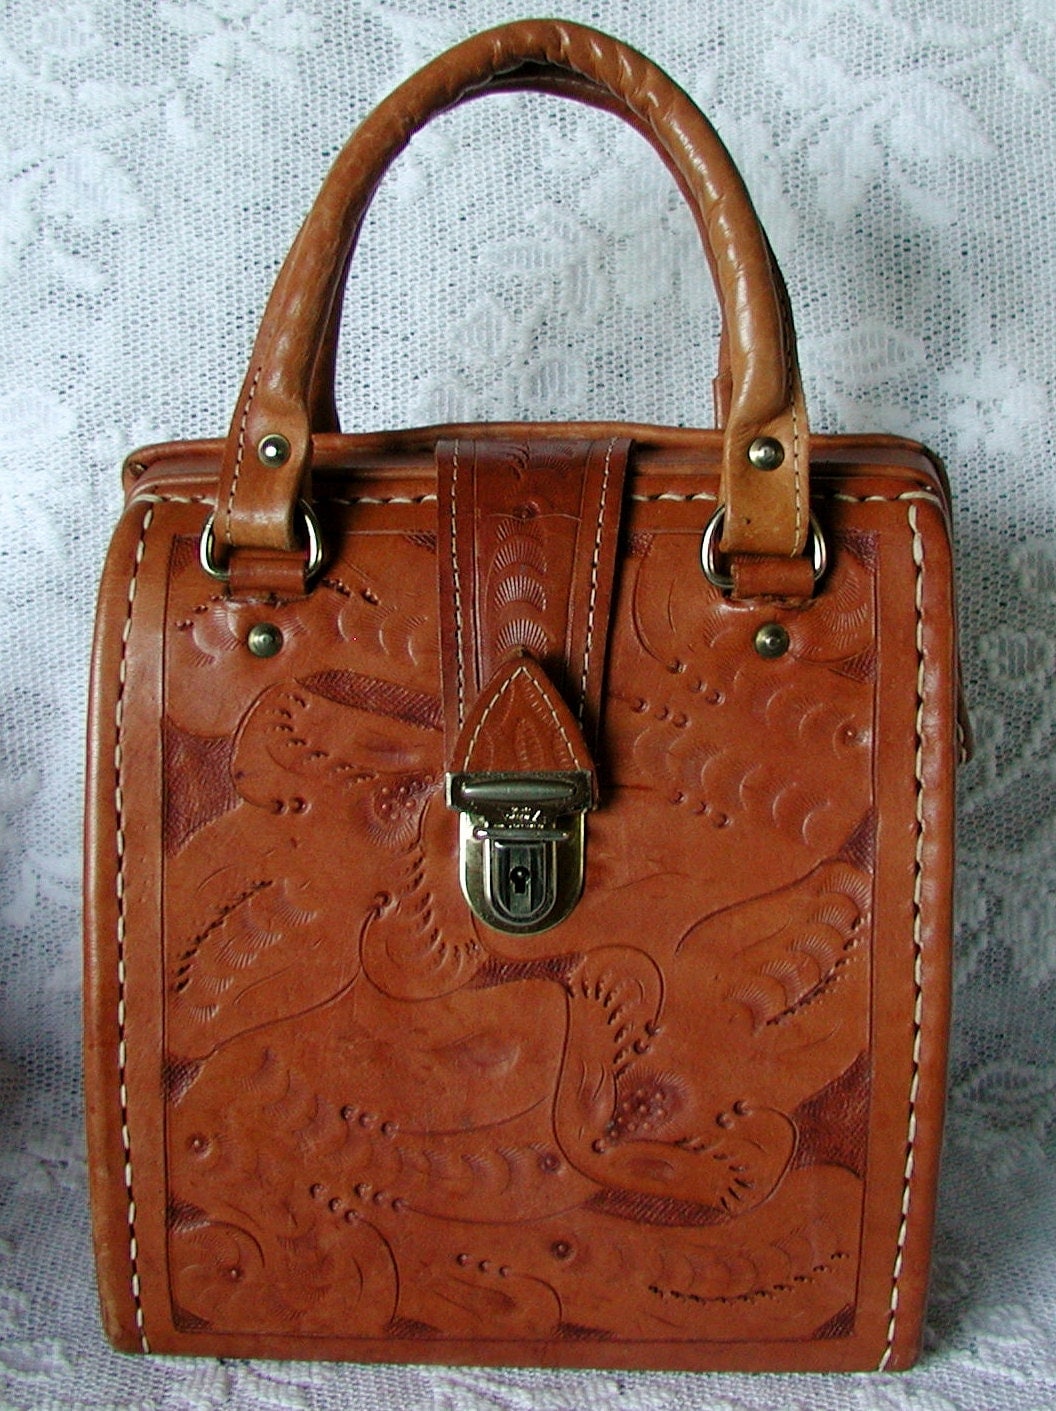 tooled-leather-purse-kits-iucn-water